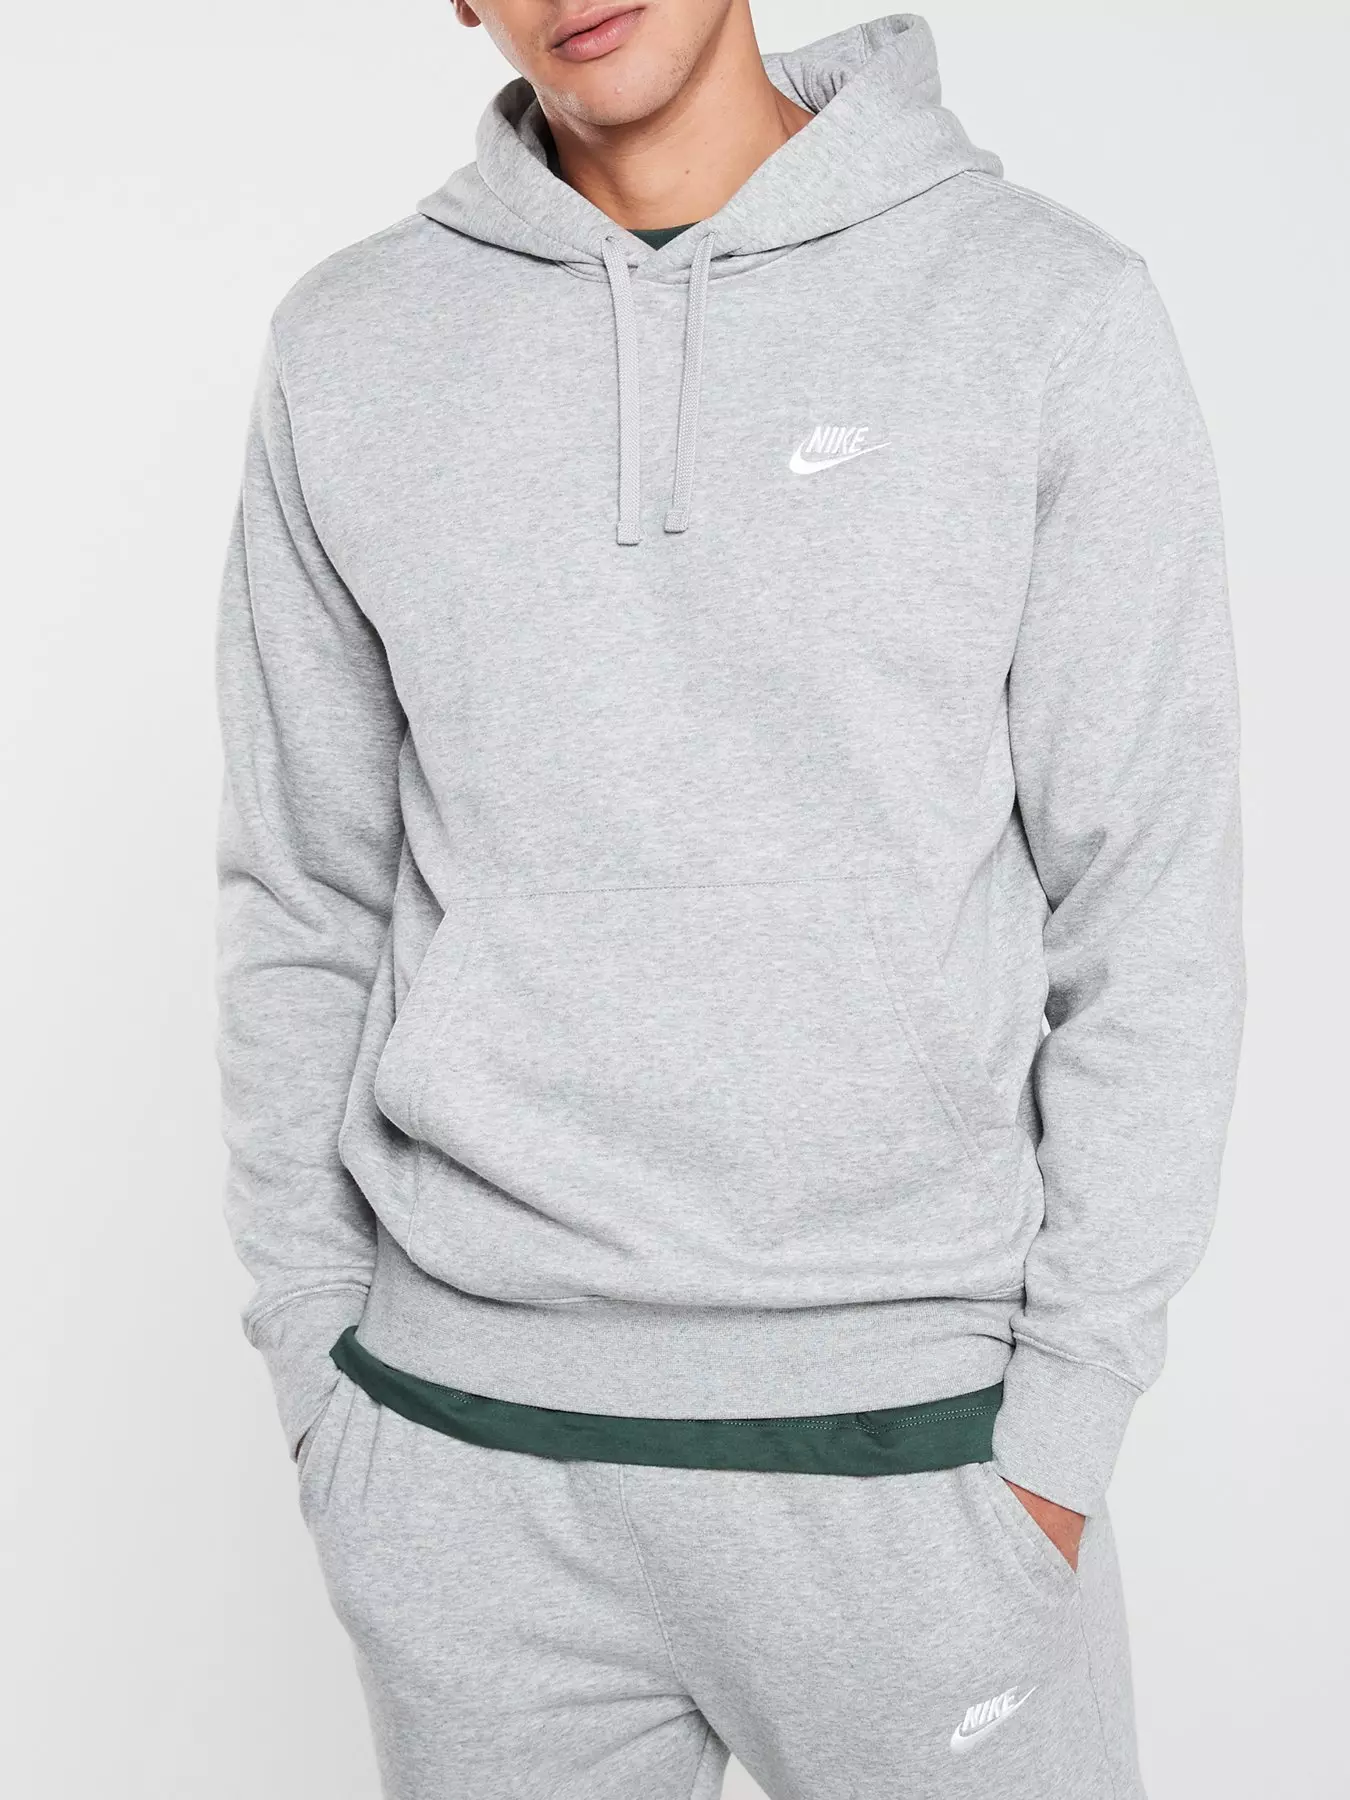 Men's Nike Tracksuits & Dry Tracksuit | Very.co.uk